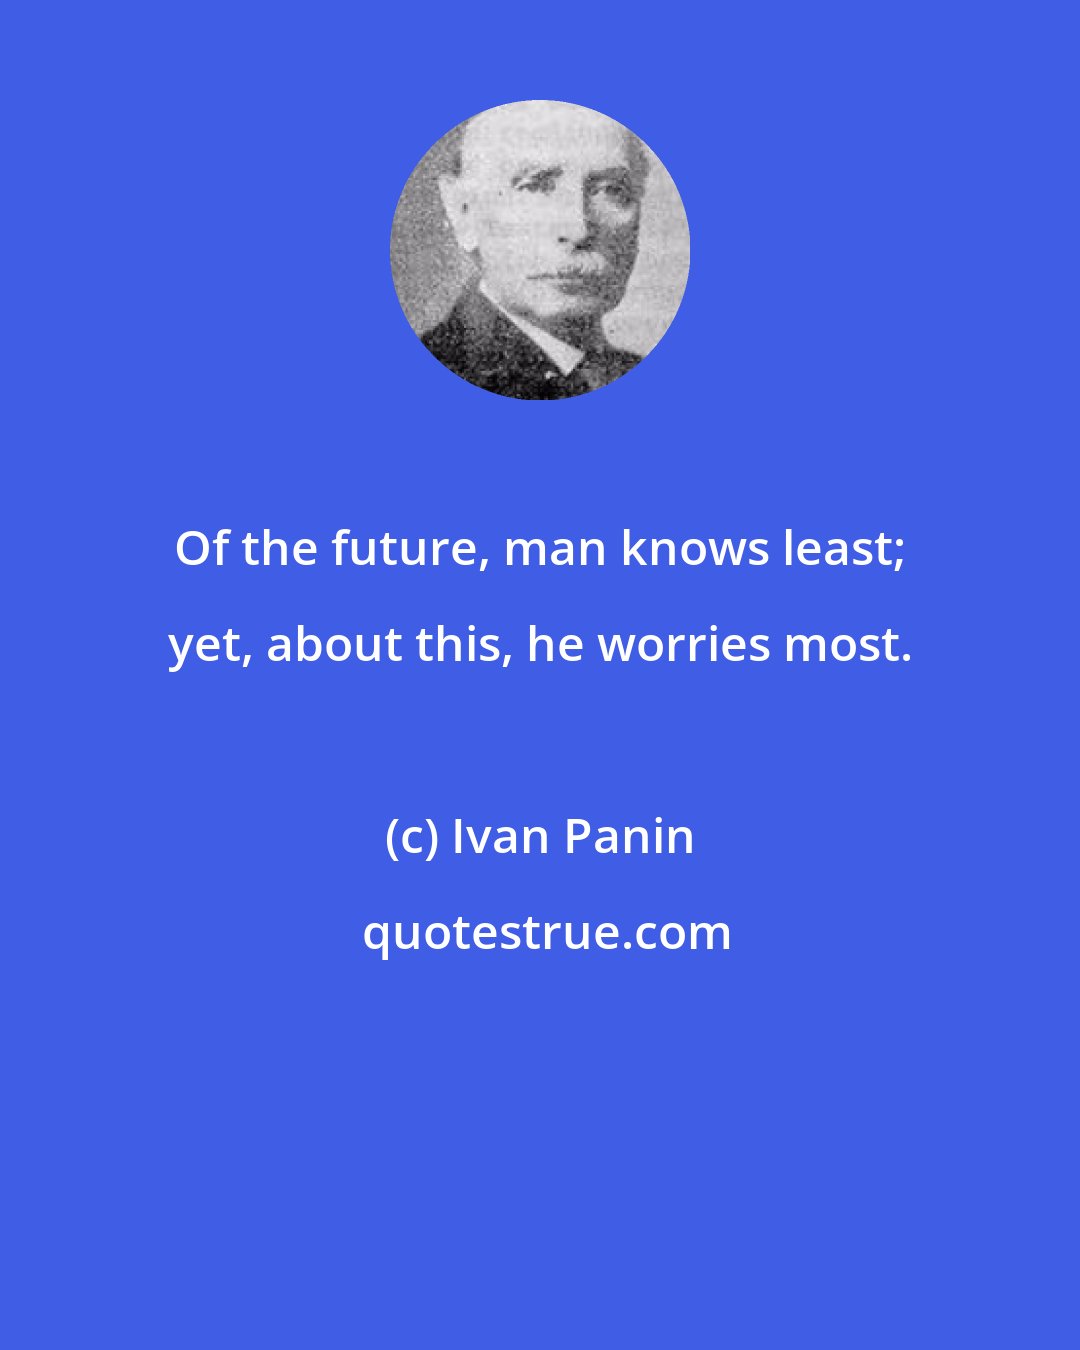 Ivan Panin: Of the future, man knows least; yet, about this, he worries most.